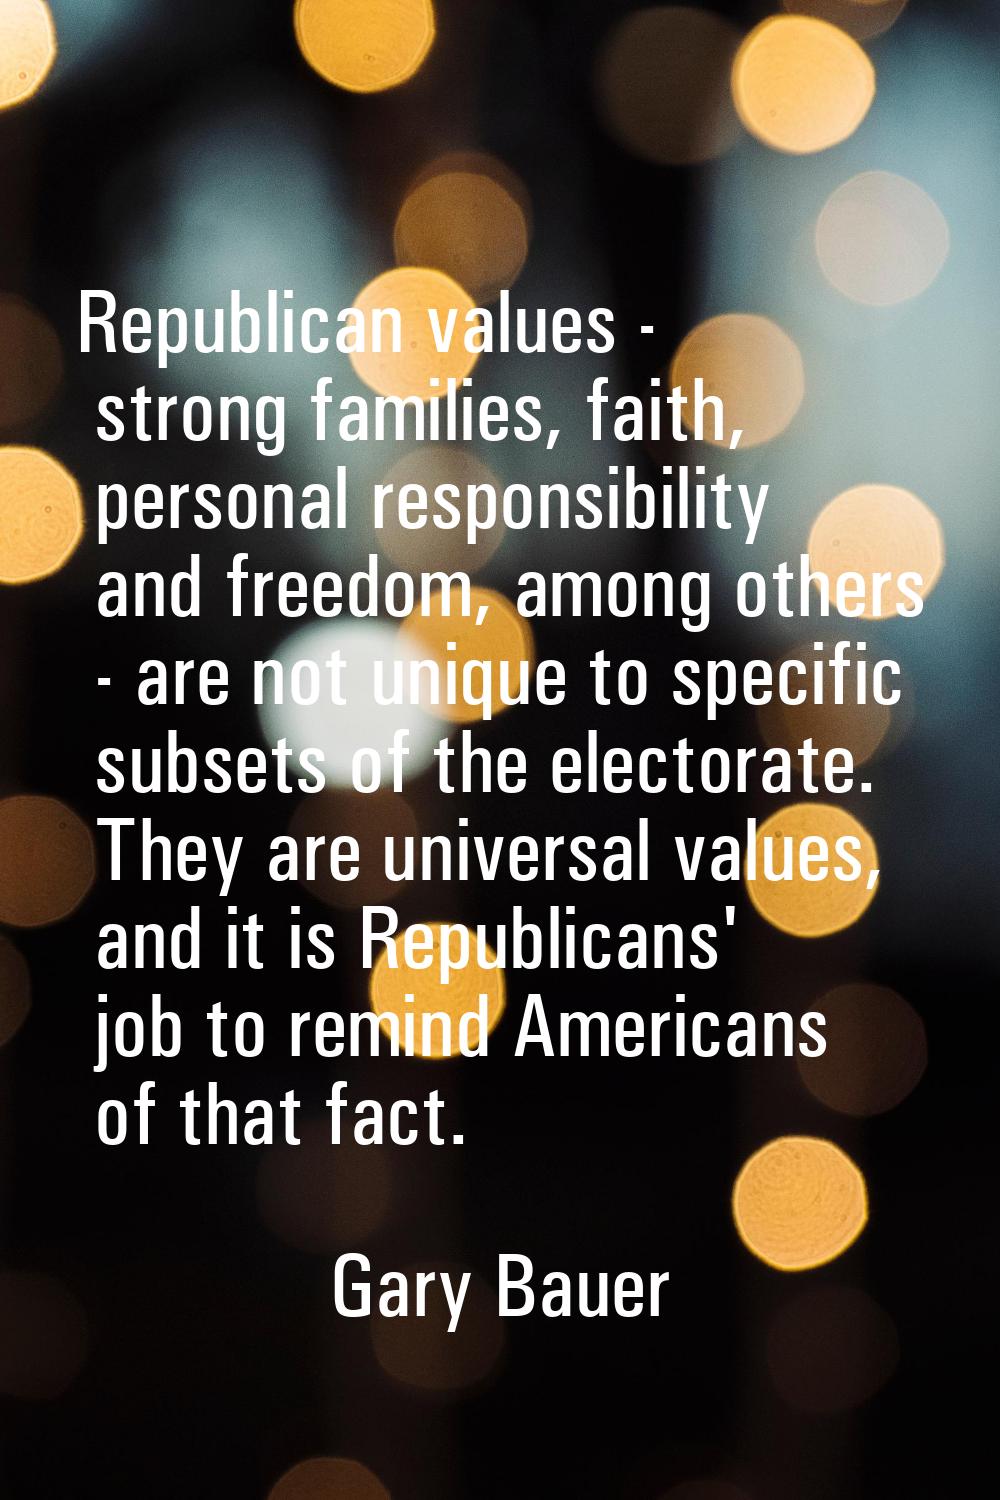 Republican values - strong families, faith, personal responsibility and freedom, among others - are